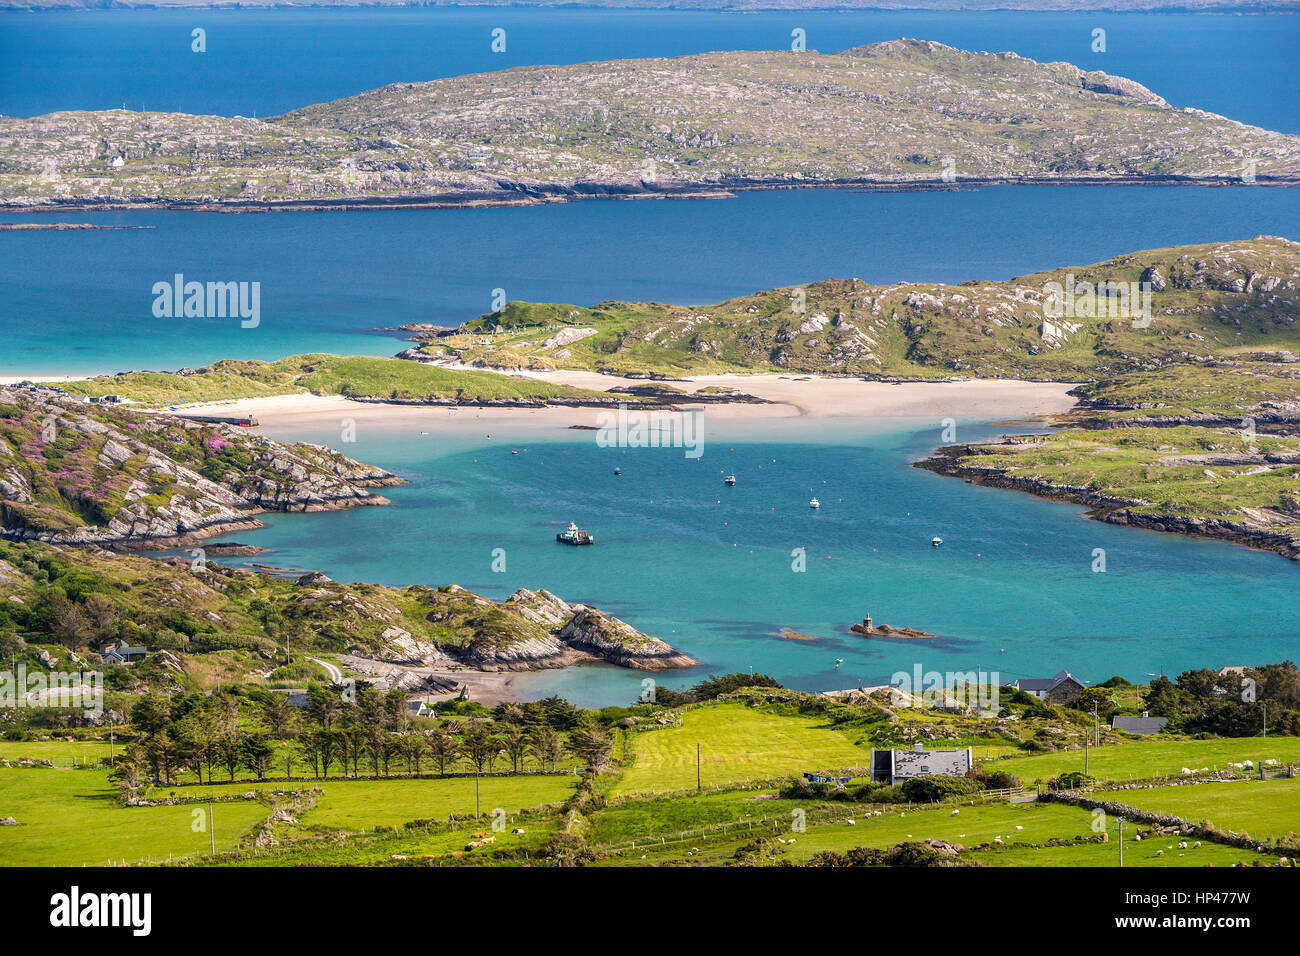 Panoramic views over Kenmare River, Abbey Island, Deenish Island and Scariff Island from Com an Chiste Pass, Ring of Kerry, Iveragh peninsula, County  Stock Photo